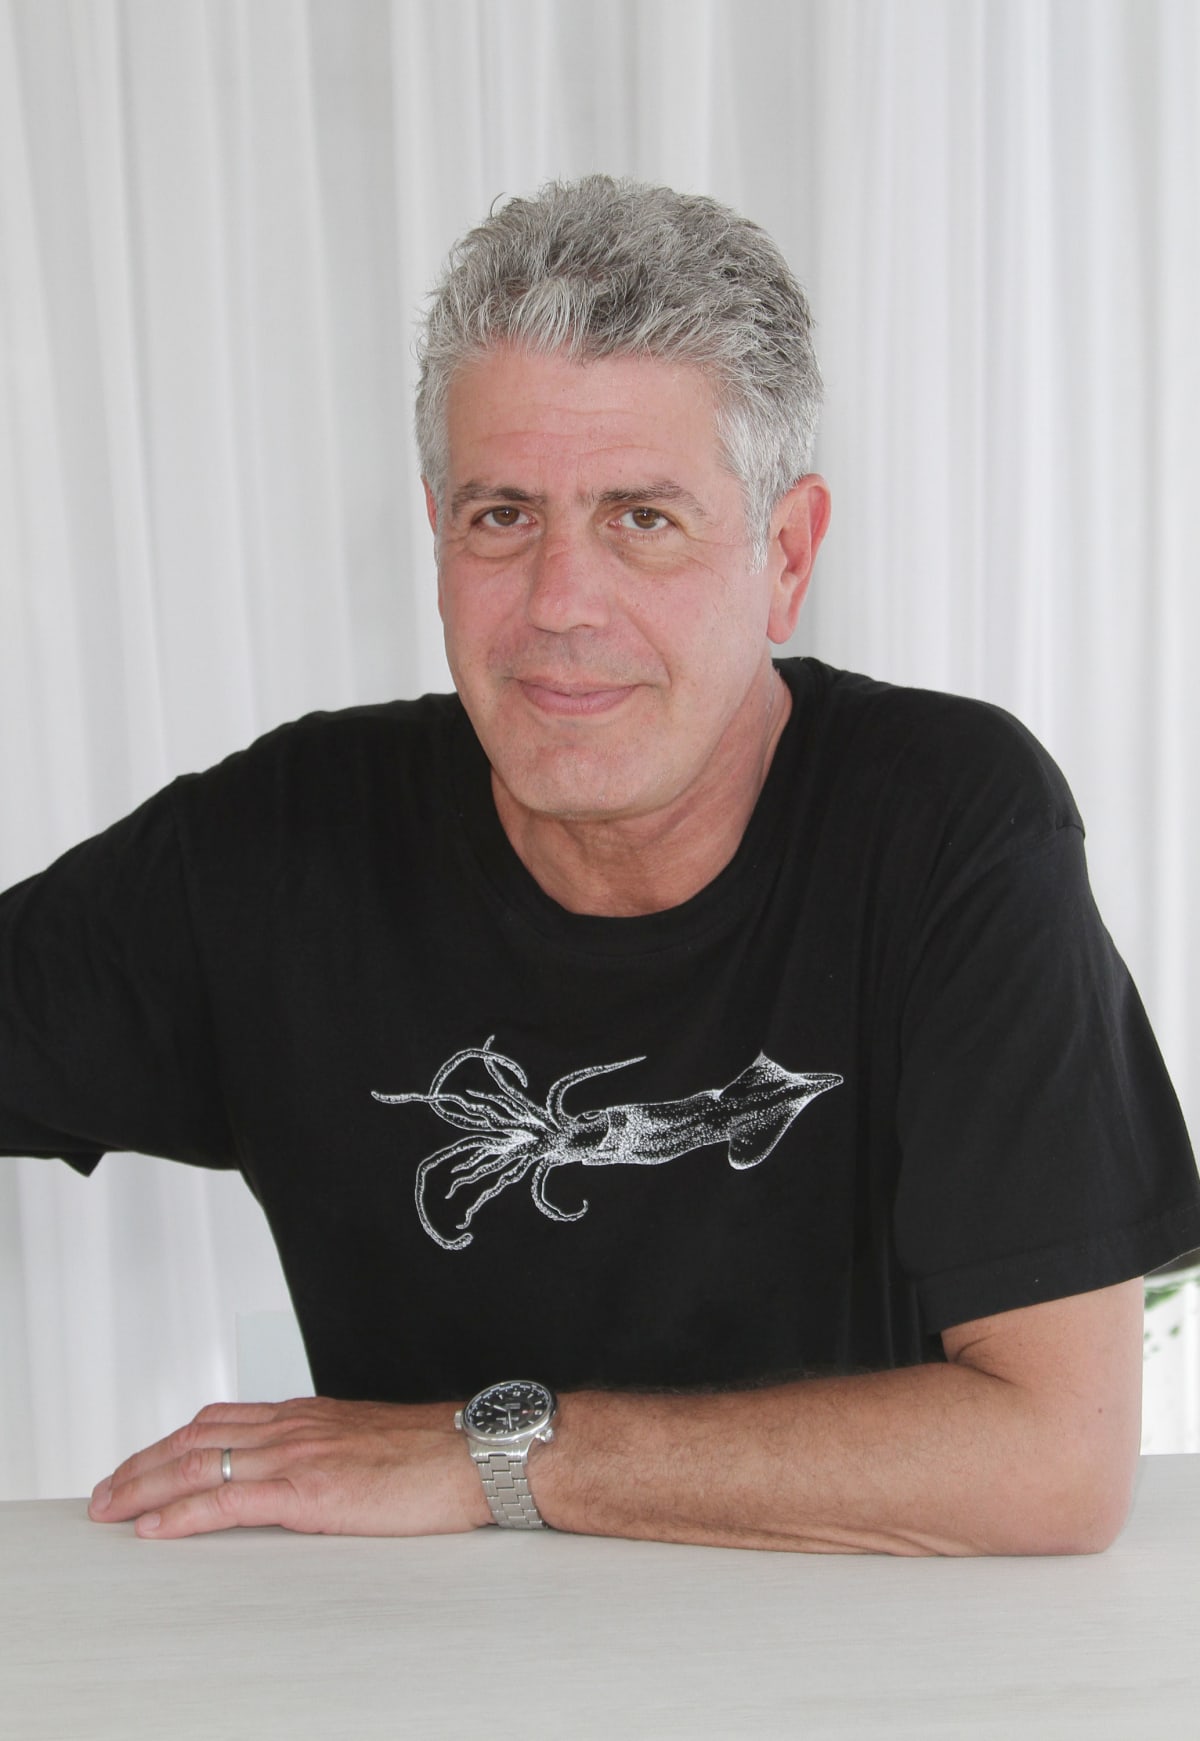 MIAMI BEACH, FL - FEBRUARY 27: Anthony Bourdain attends the Whole Foods Market Grand Tasting Village during the 2011 South Beach Wine and Food Festival on February 27, 2011 in Miami Beach, Florida. (Photo by Alexander Tamargo/Getty Images)